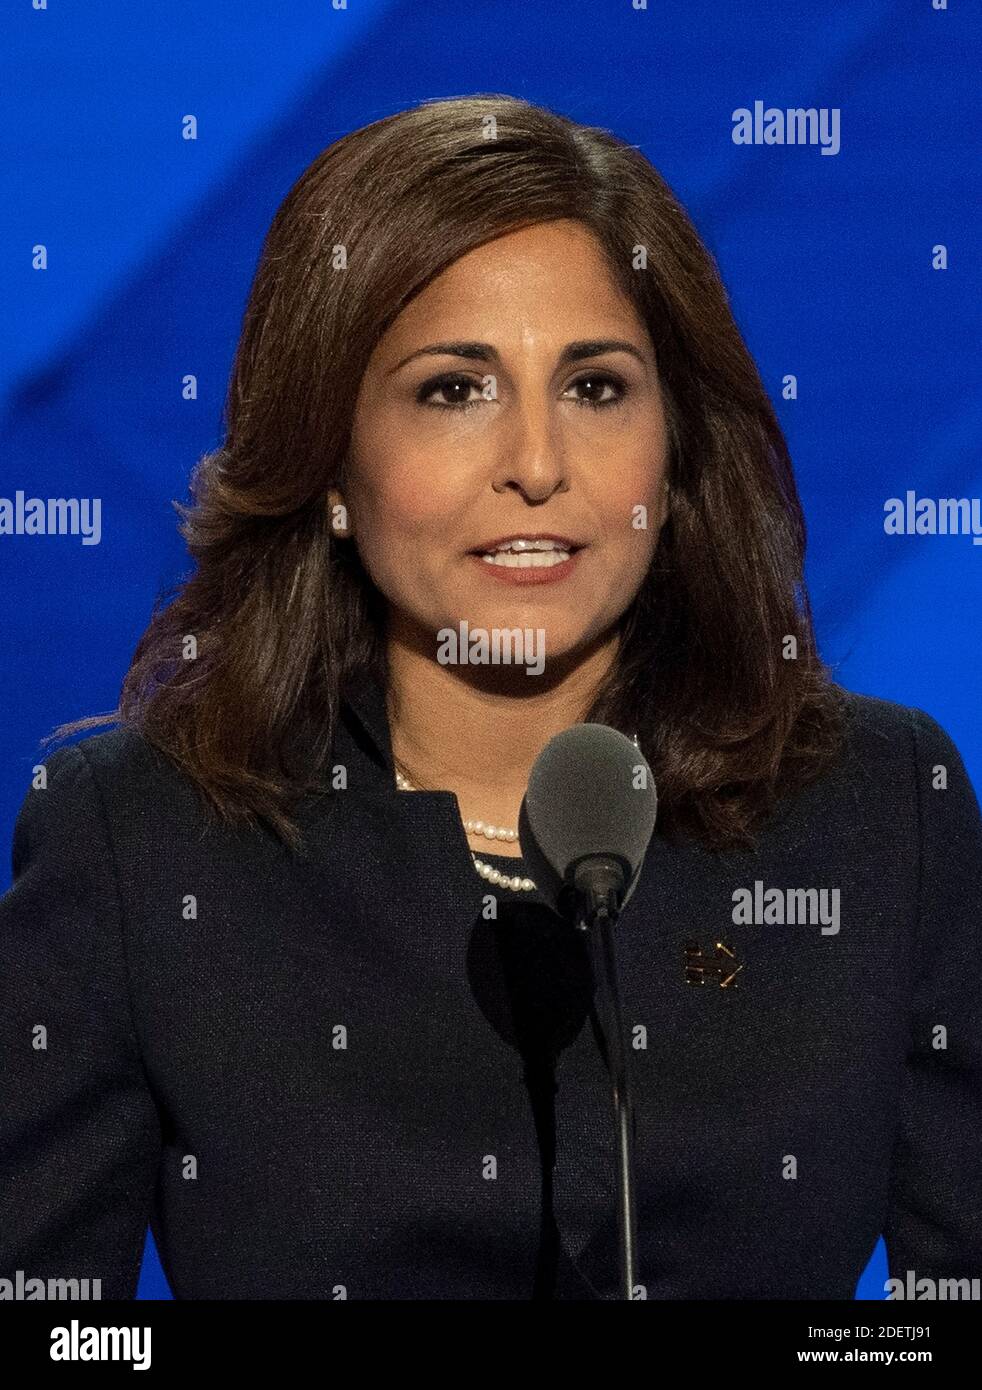 Neera Tanden, President and CEO, Center for American Progress, makes remarks during the third session of the 2016 Democratic National Convention at the Wells Fargo Center in Philadelphia, Pennsylvania on Wednesday, July 27, 2016.Credit: Ron Sachs/CNP (RESTRICTION: NO New York or New Jersey Newspapers or newspapers within a 75 mile radius of New York City) | usage worldwide Stock Photo